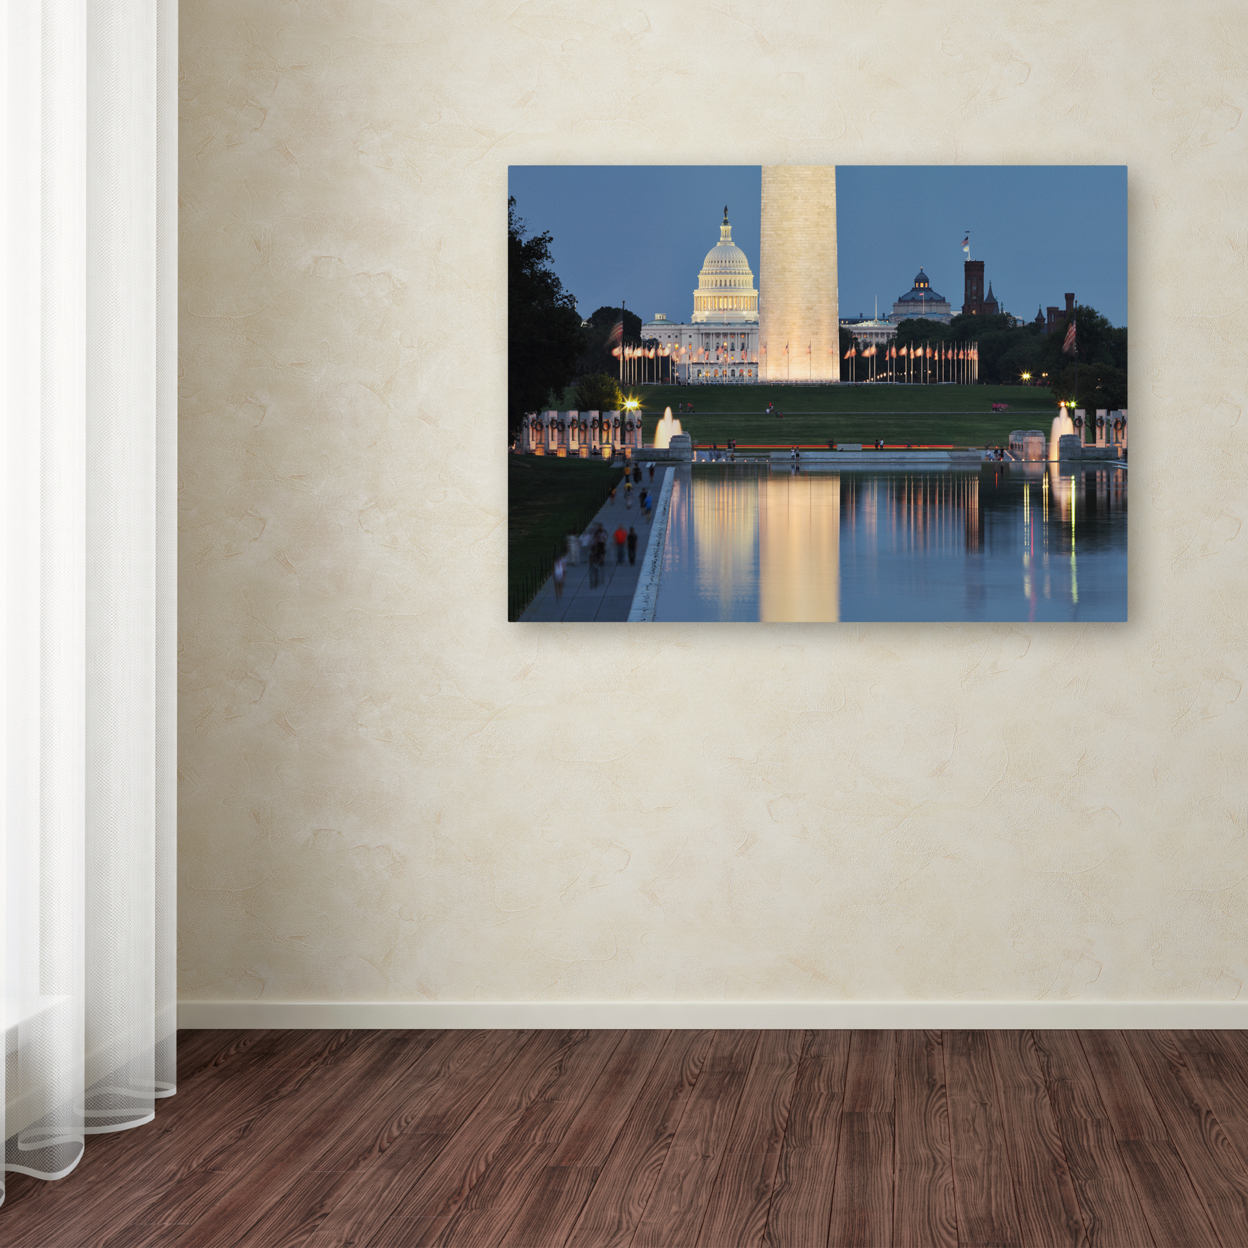 Gregory O'Hanlon 'National Mall At Twilight' Canvas Wall Art 35 X 47 Inches